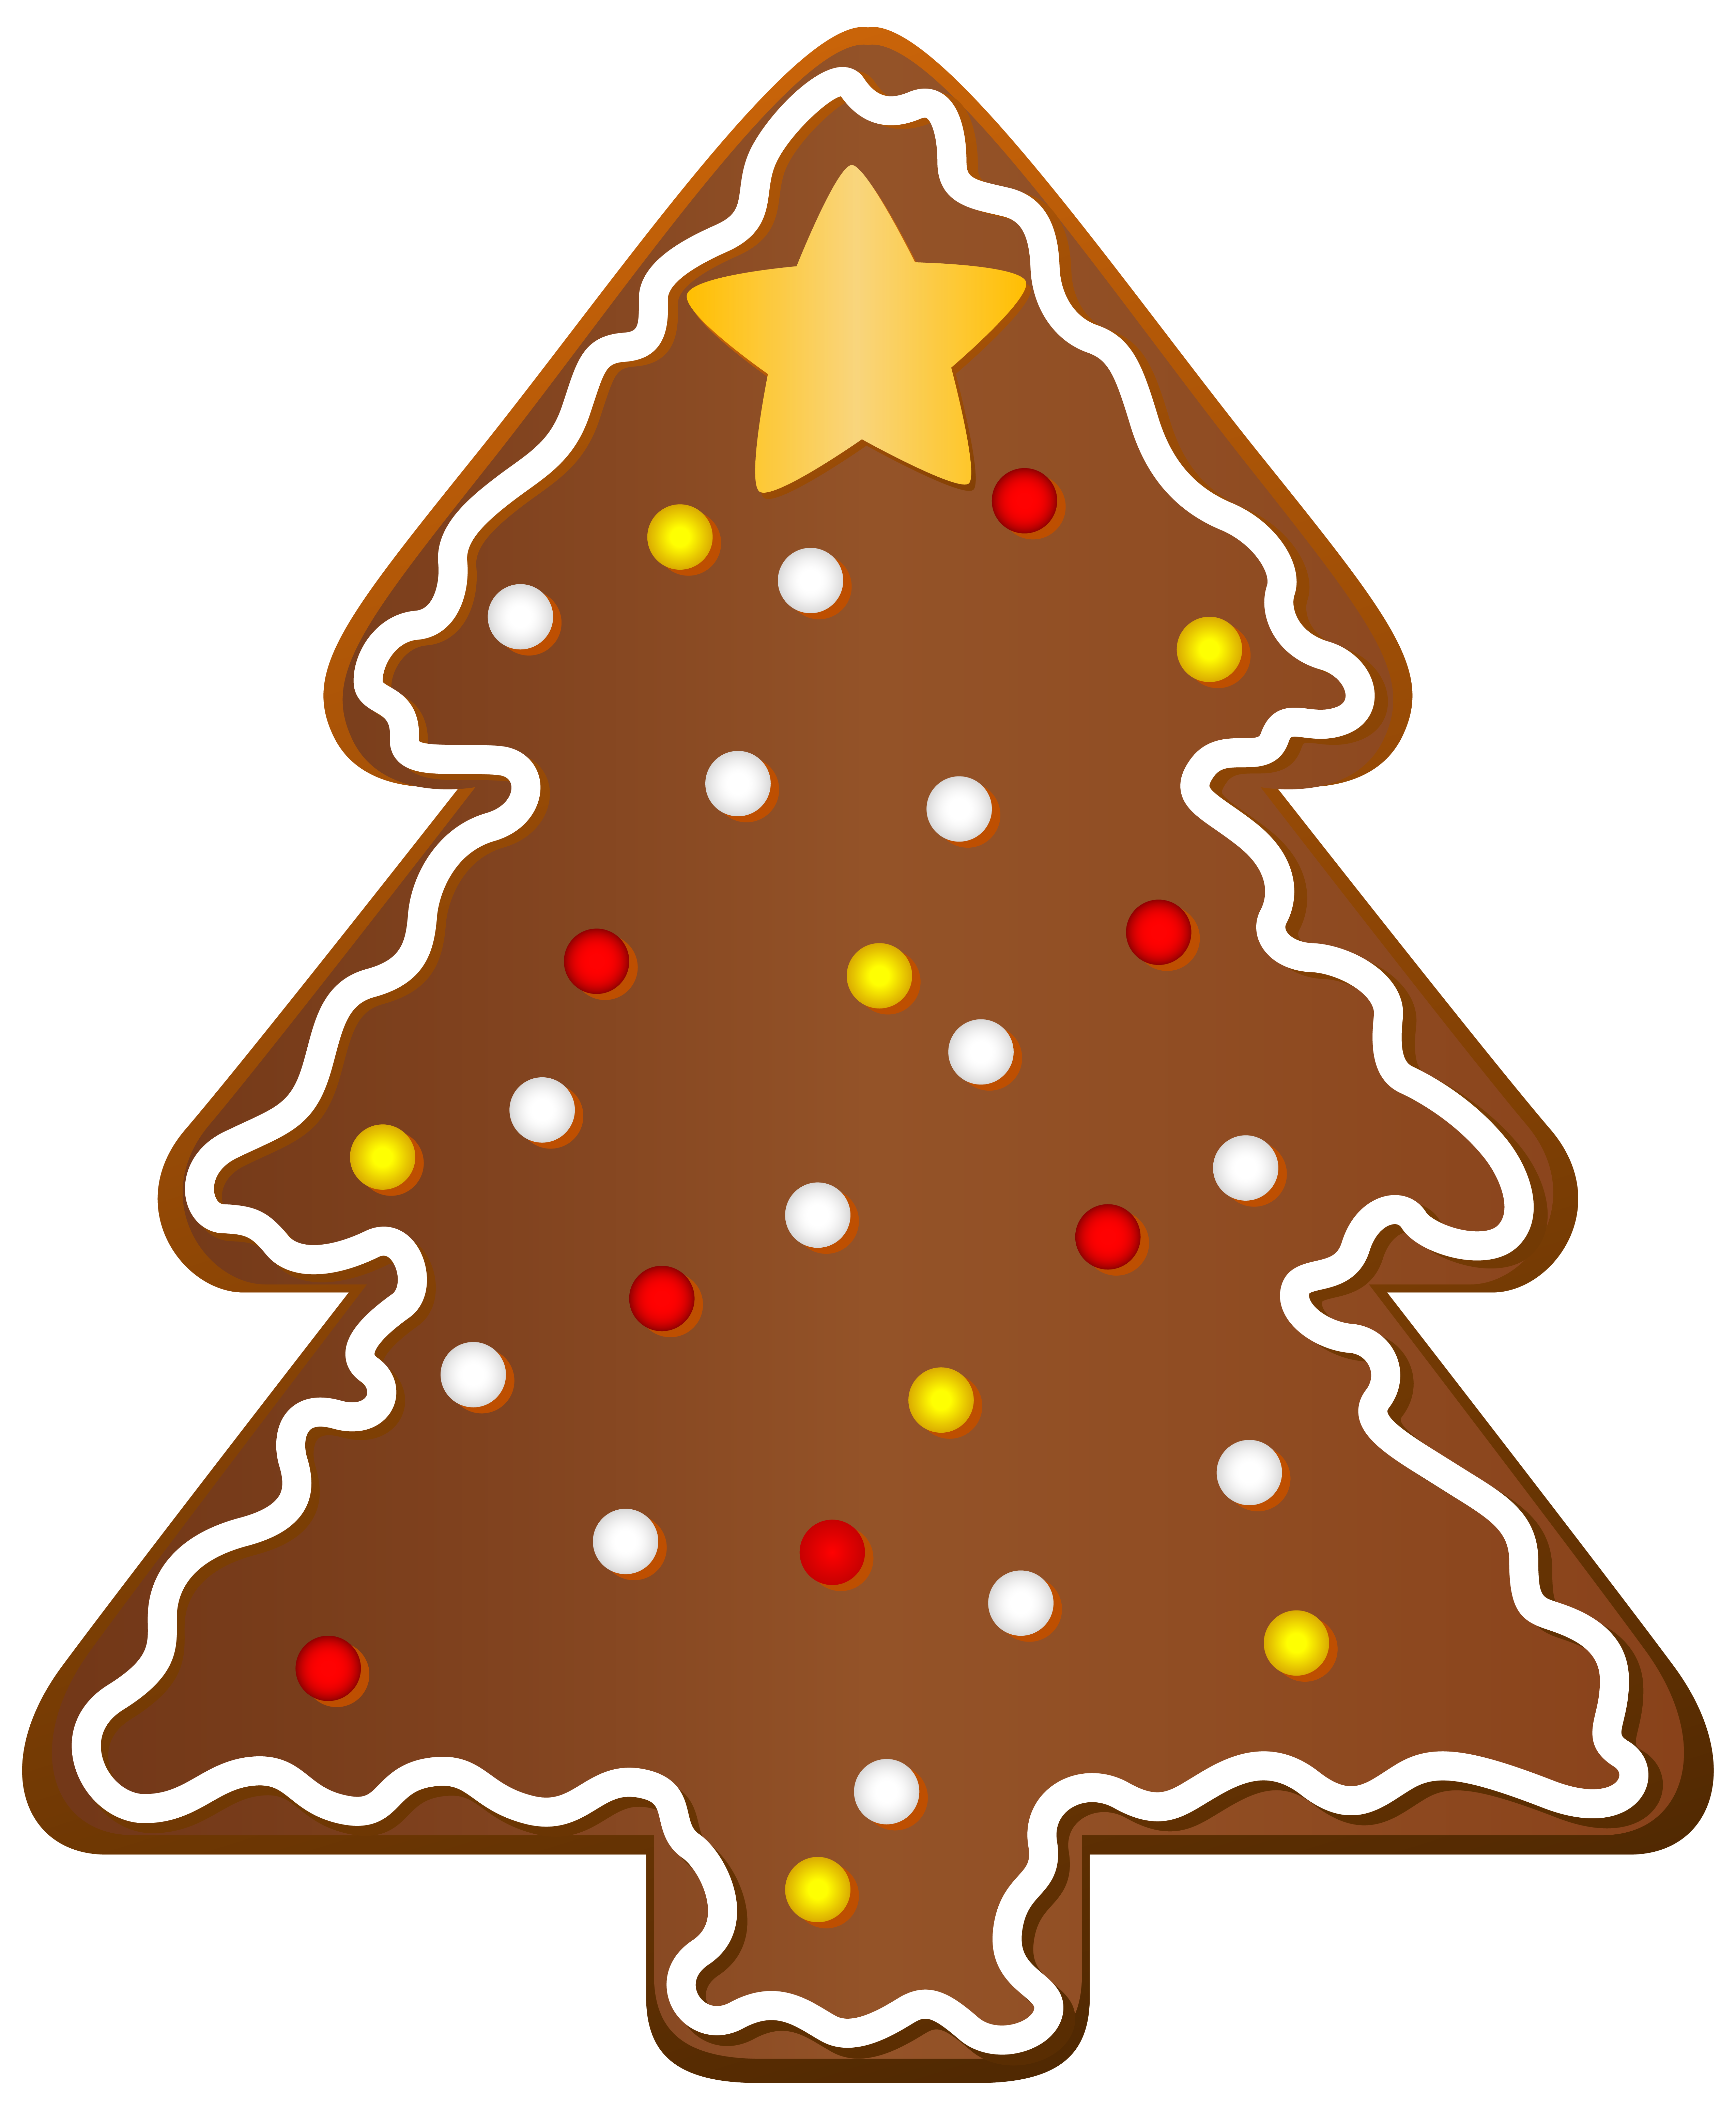 Christmas Cookie Tree Clipart PNG Image | Gallery ...